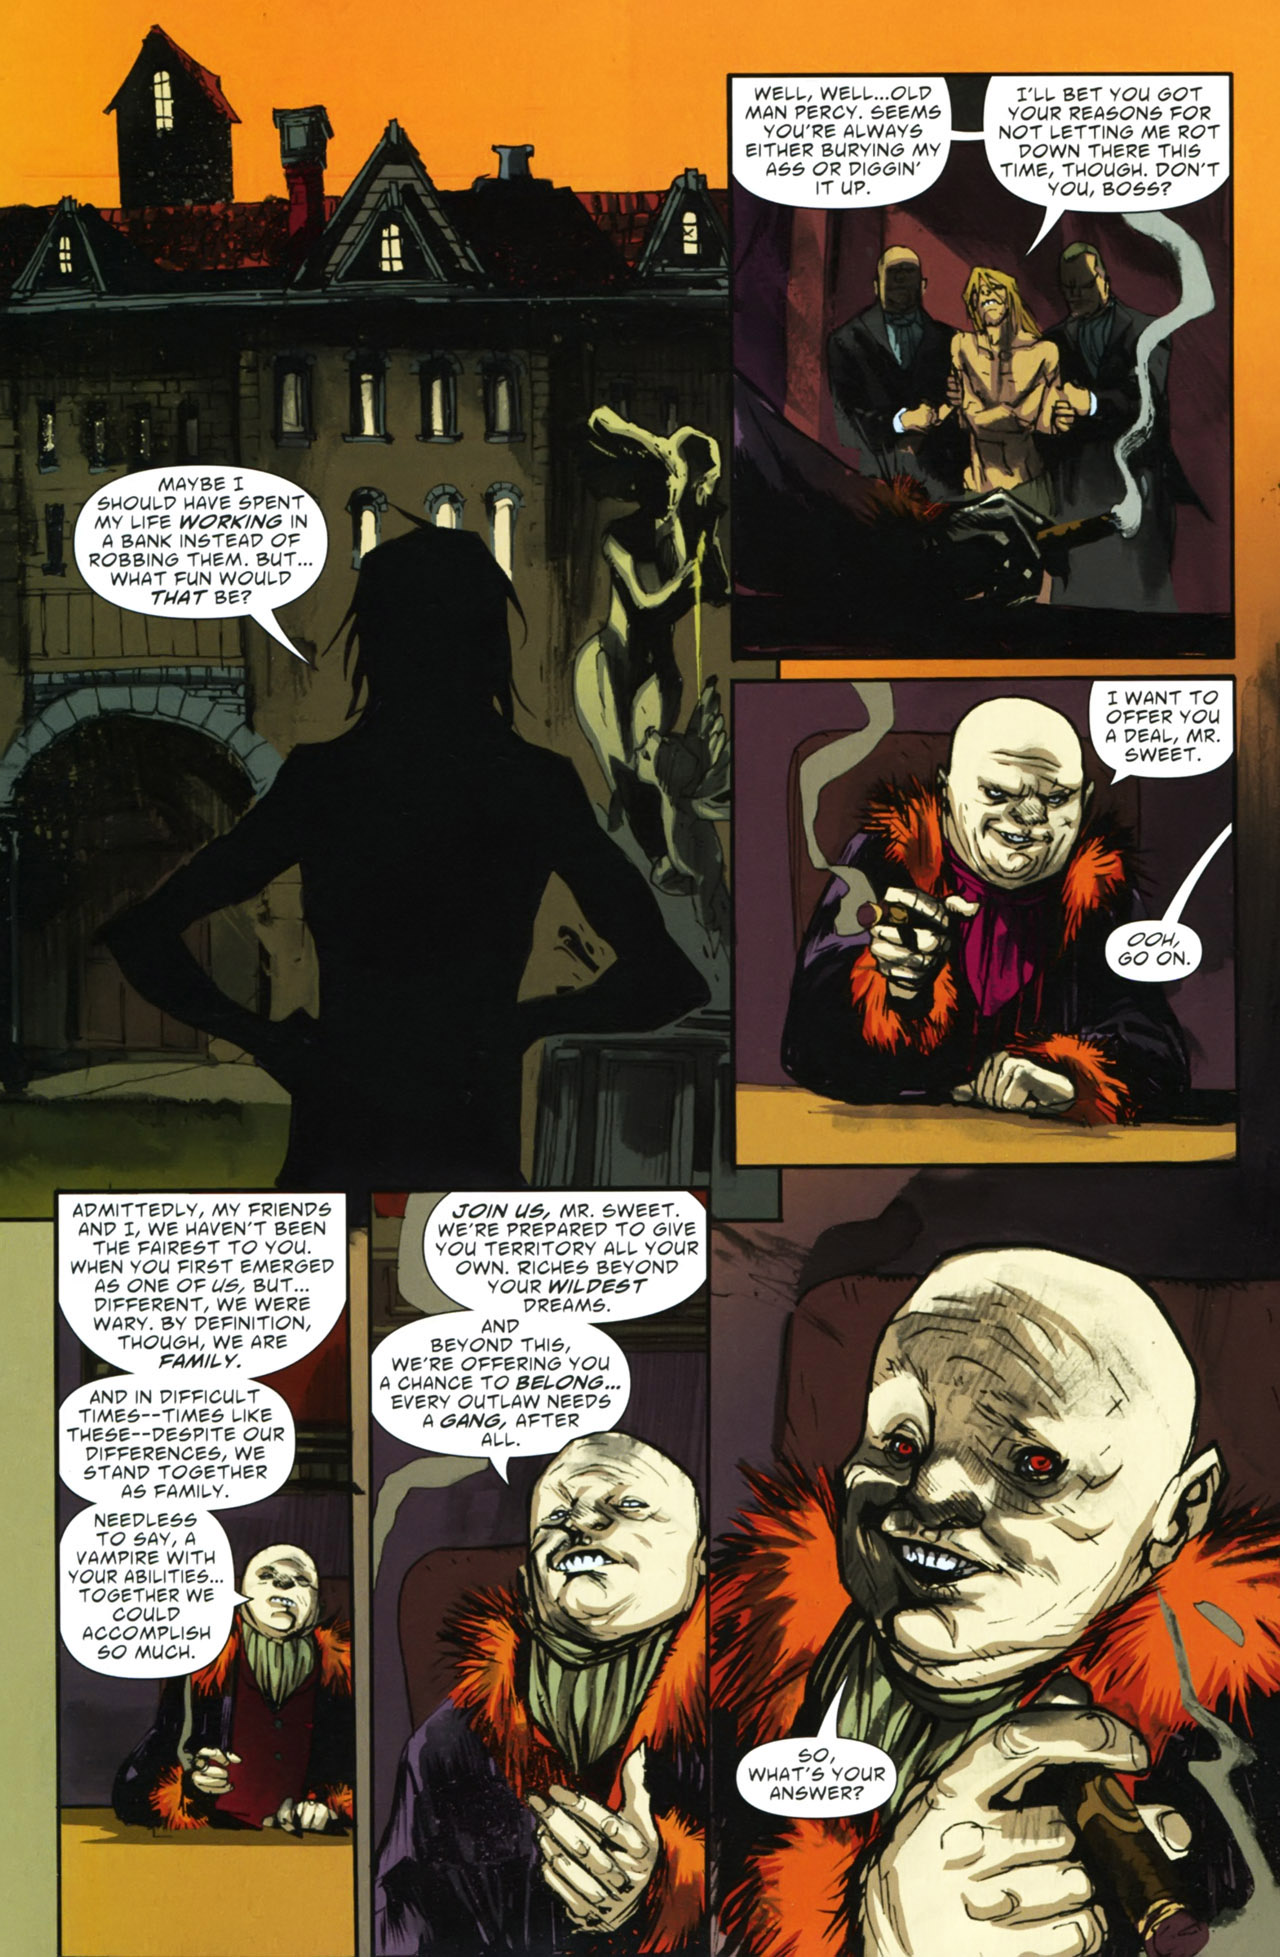 American Vampire #5 - Curtain Call; If Thy Right Hand Offend Thee; Cut it Off